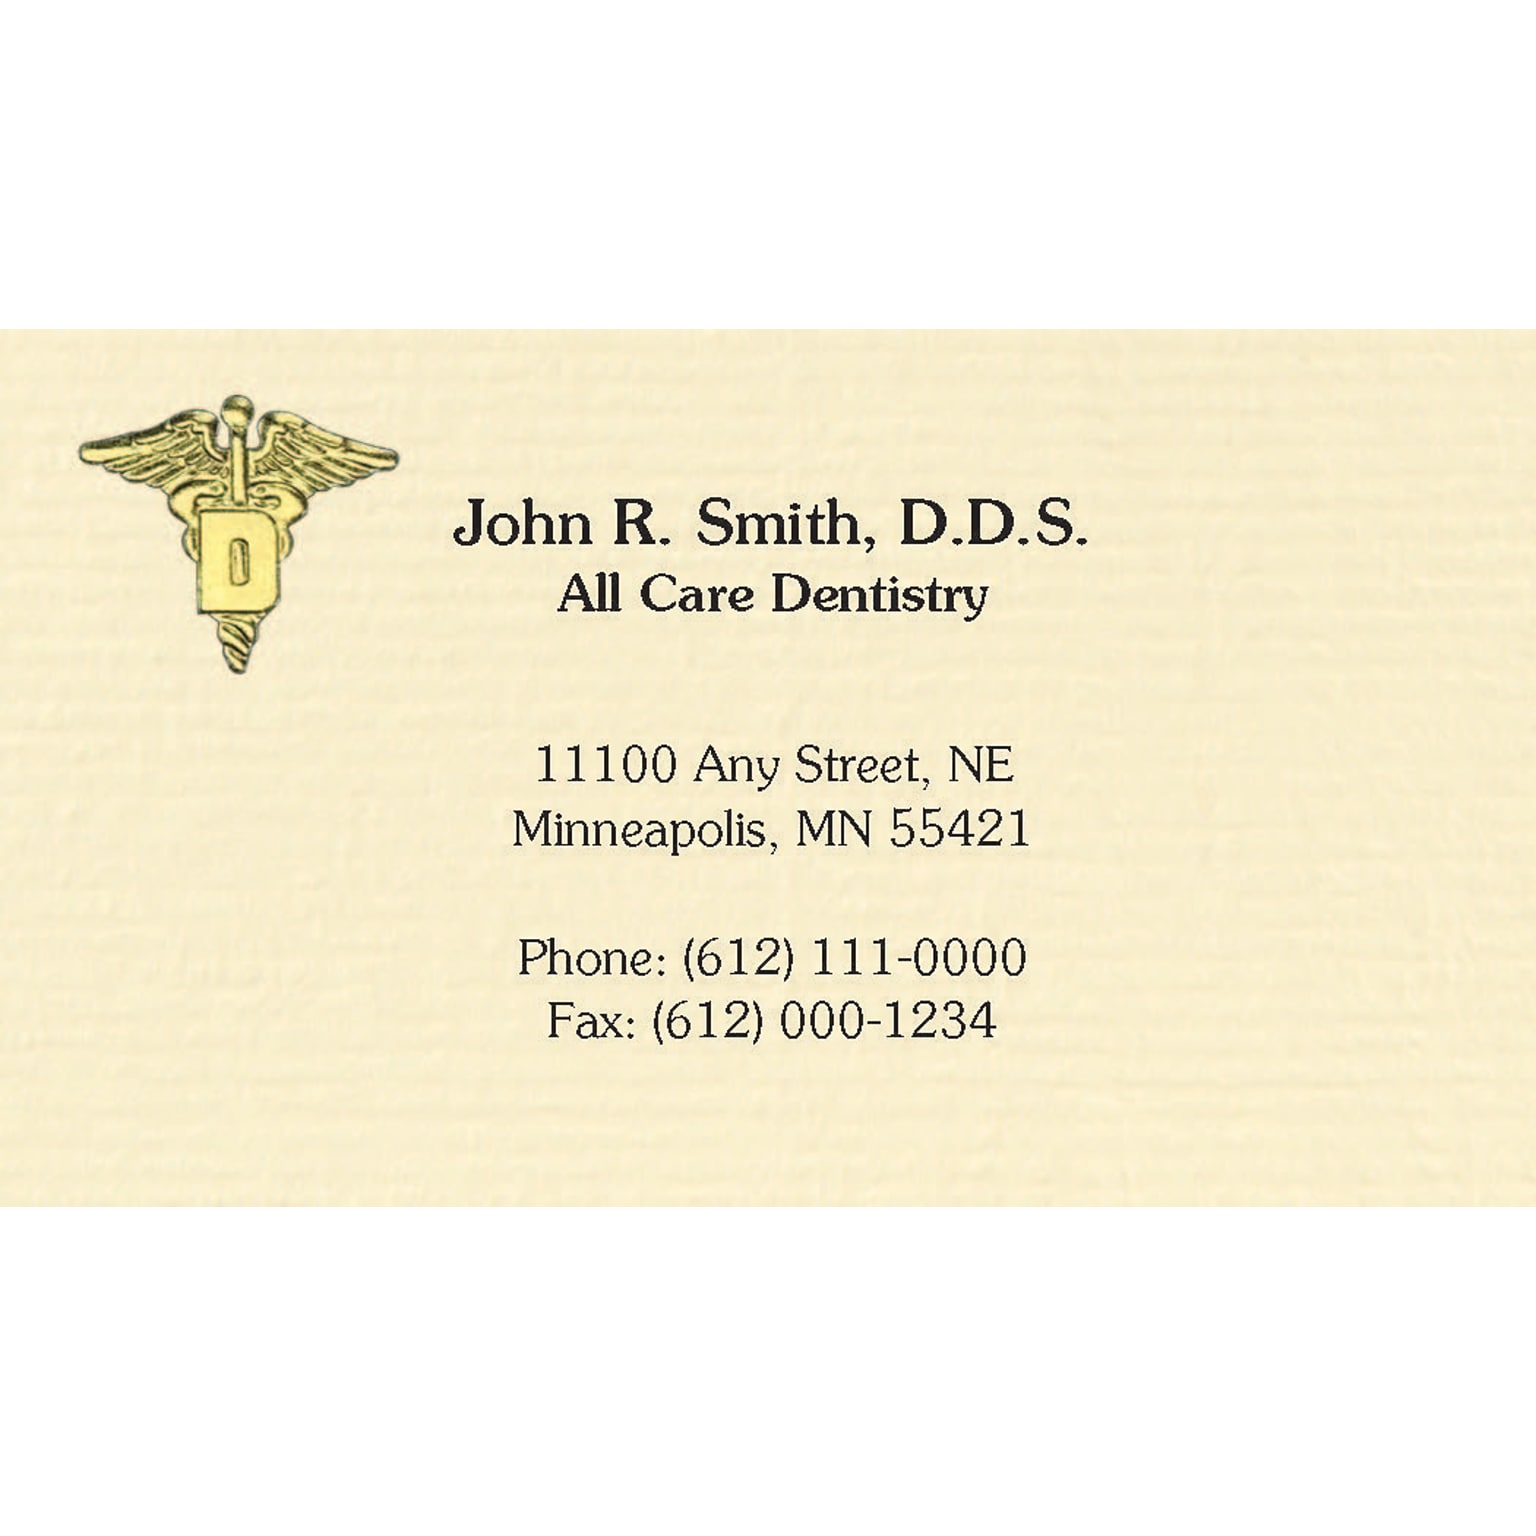 Custom Gold Foil Embossed Business Cards, CLASSIC® Ivory Laid 80#, Flat Ink, 1 Standard Ink, 1-Sided, Logo 203, 250/PK